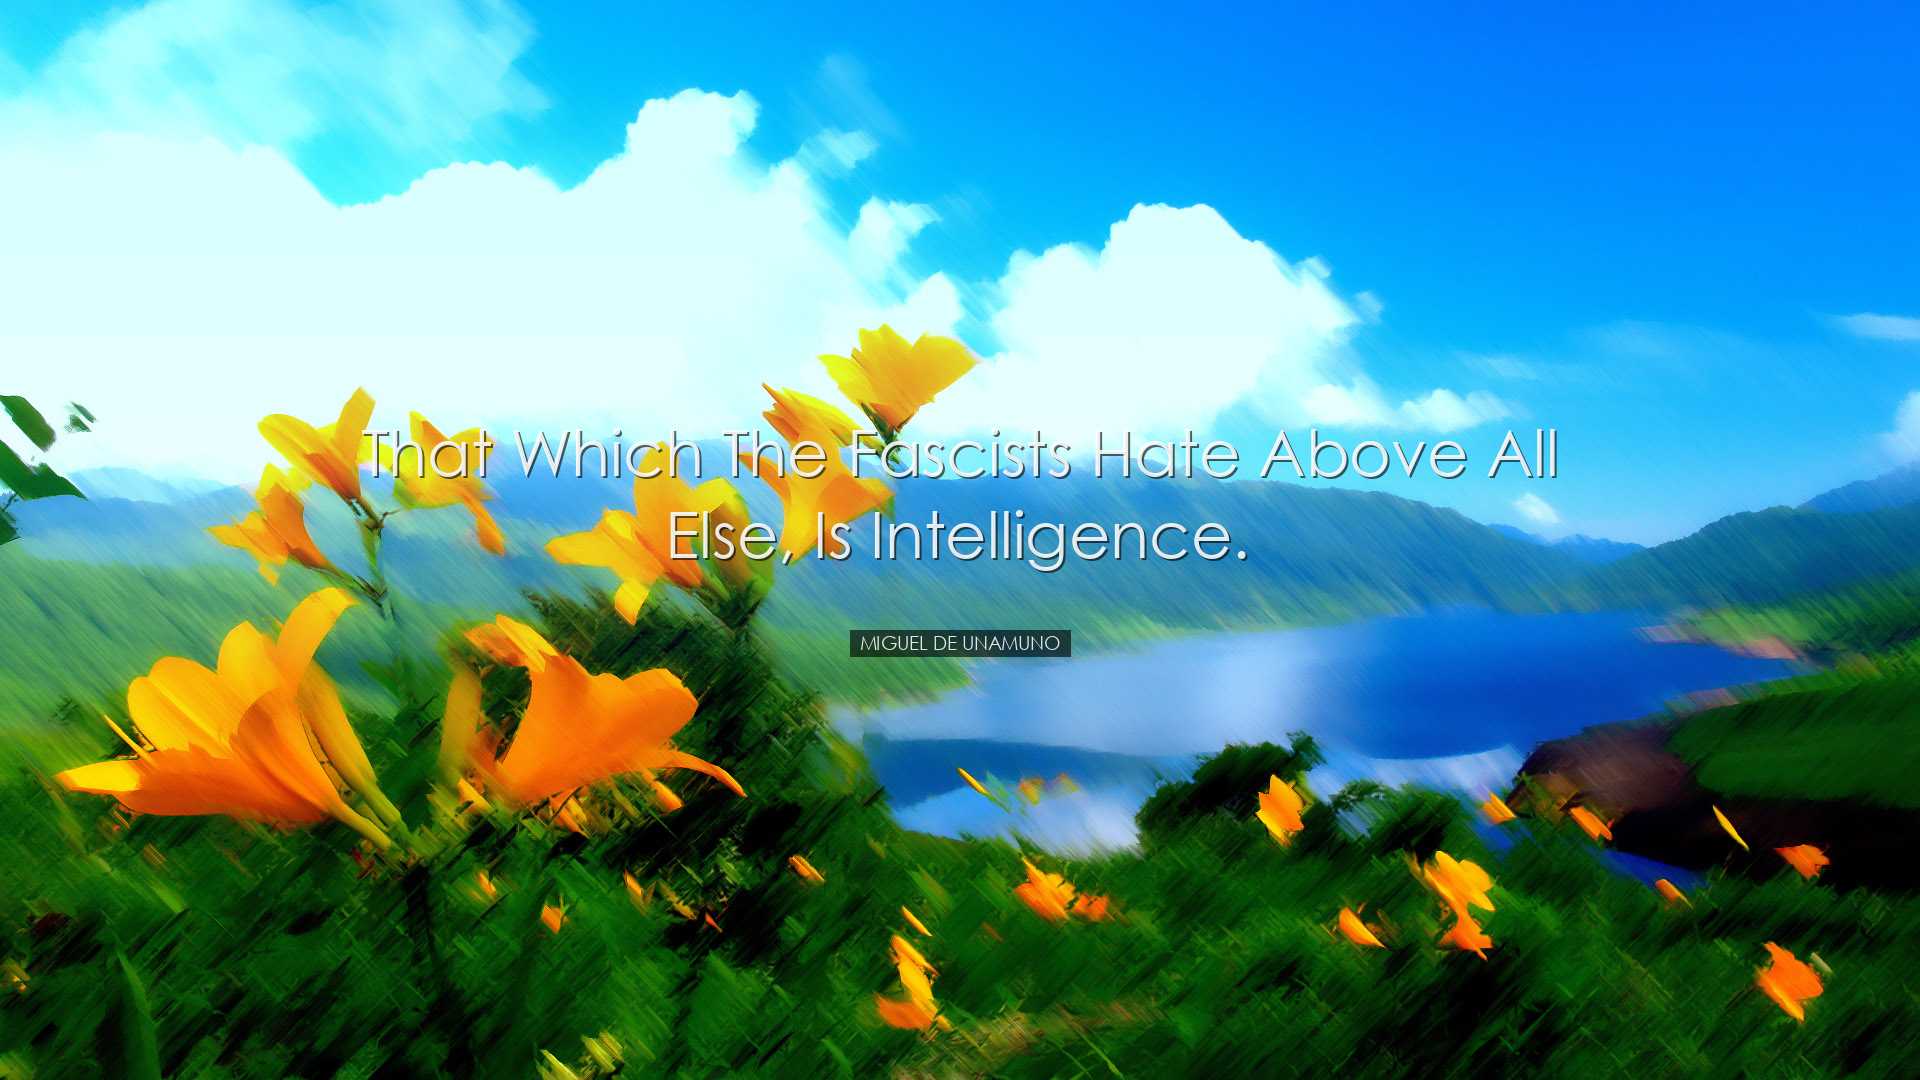 That which the Fascists hate above all else, is intelligence. - Mi